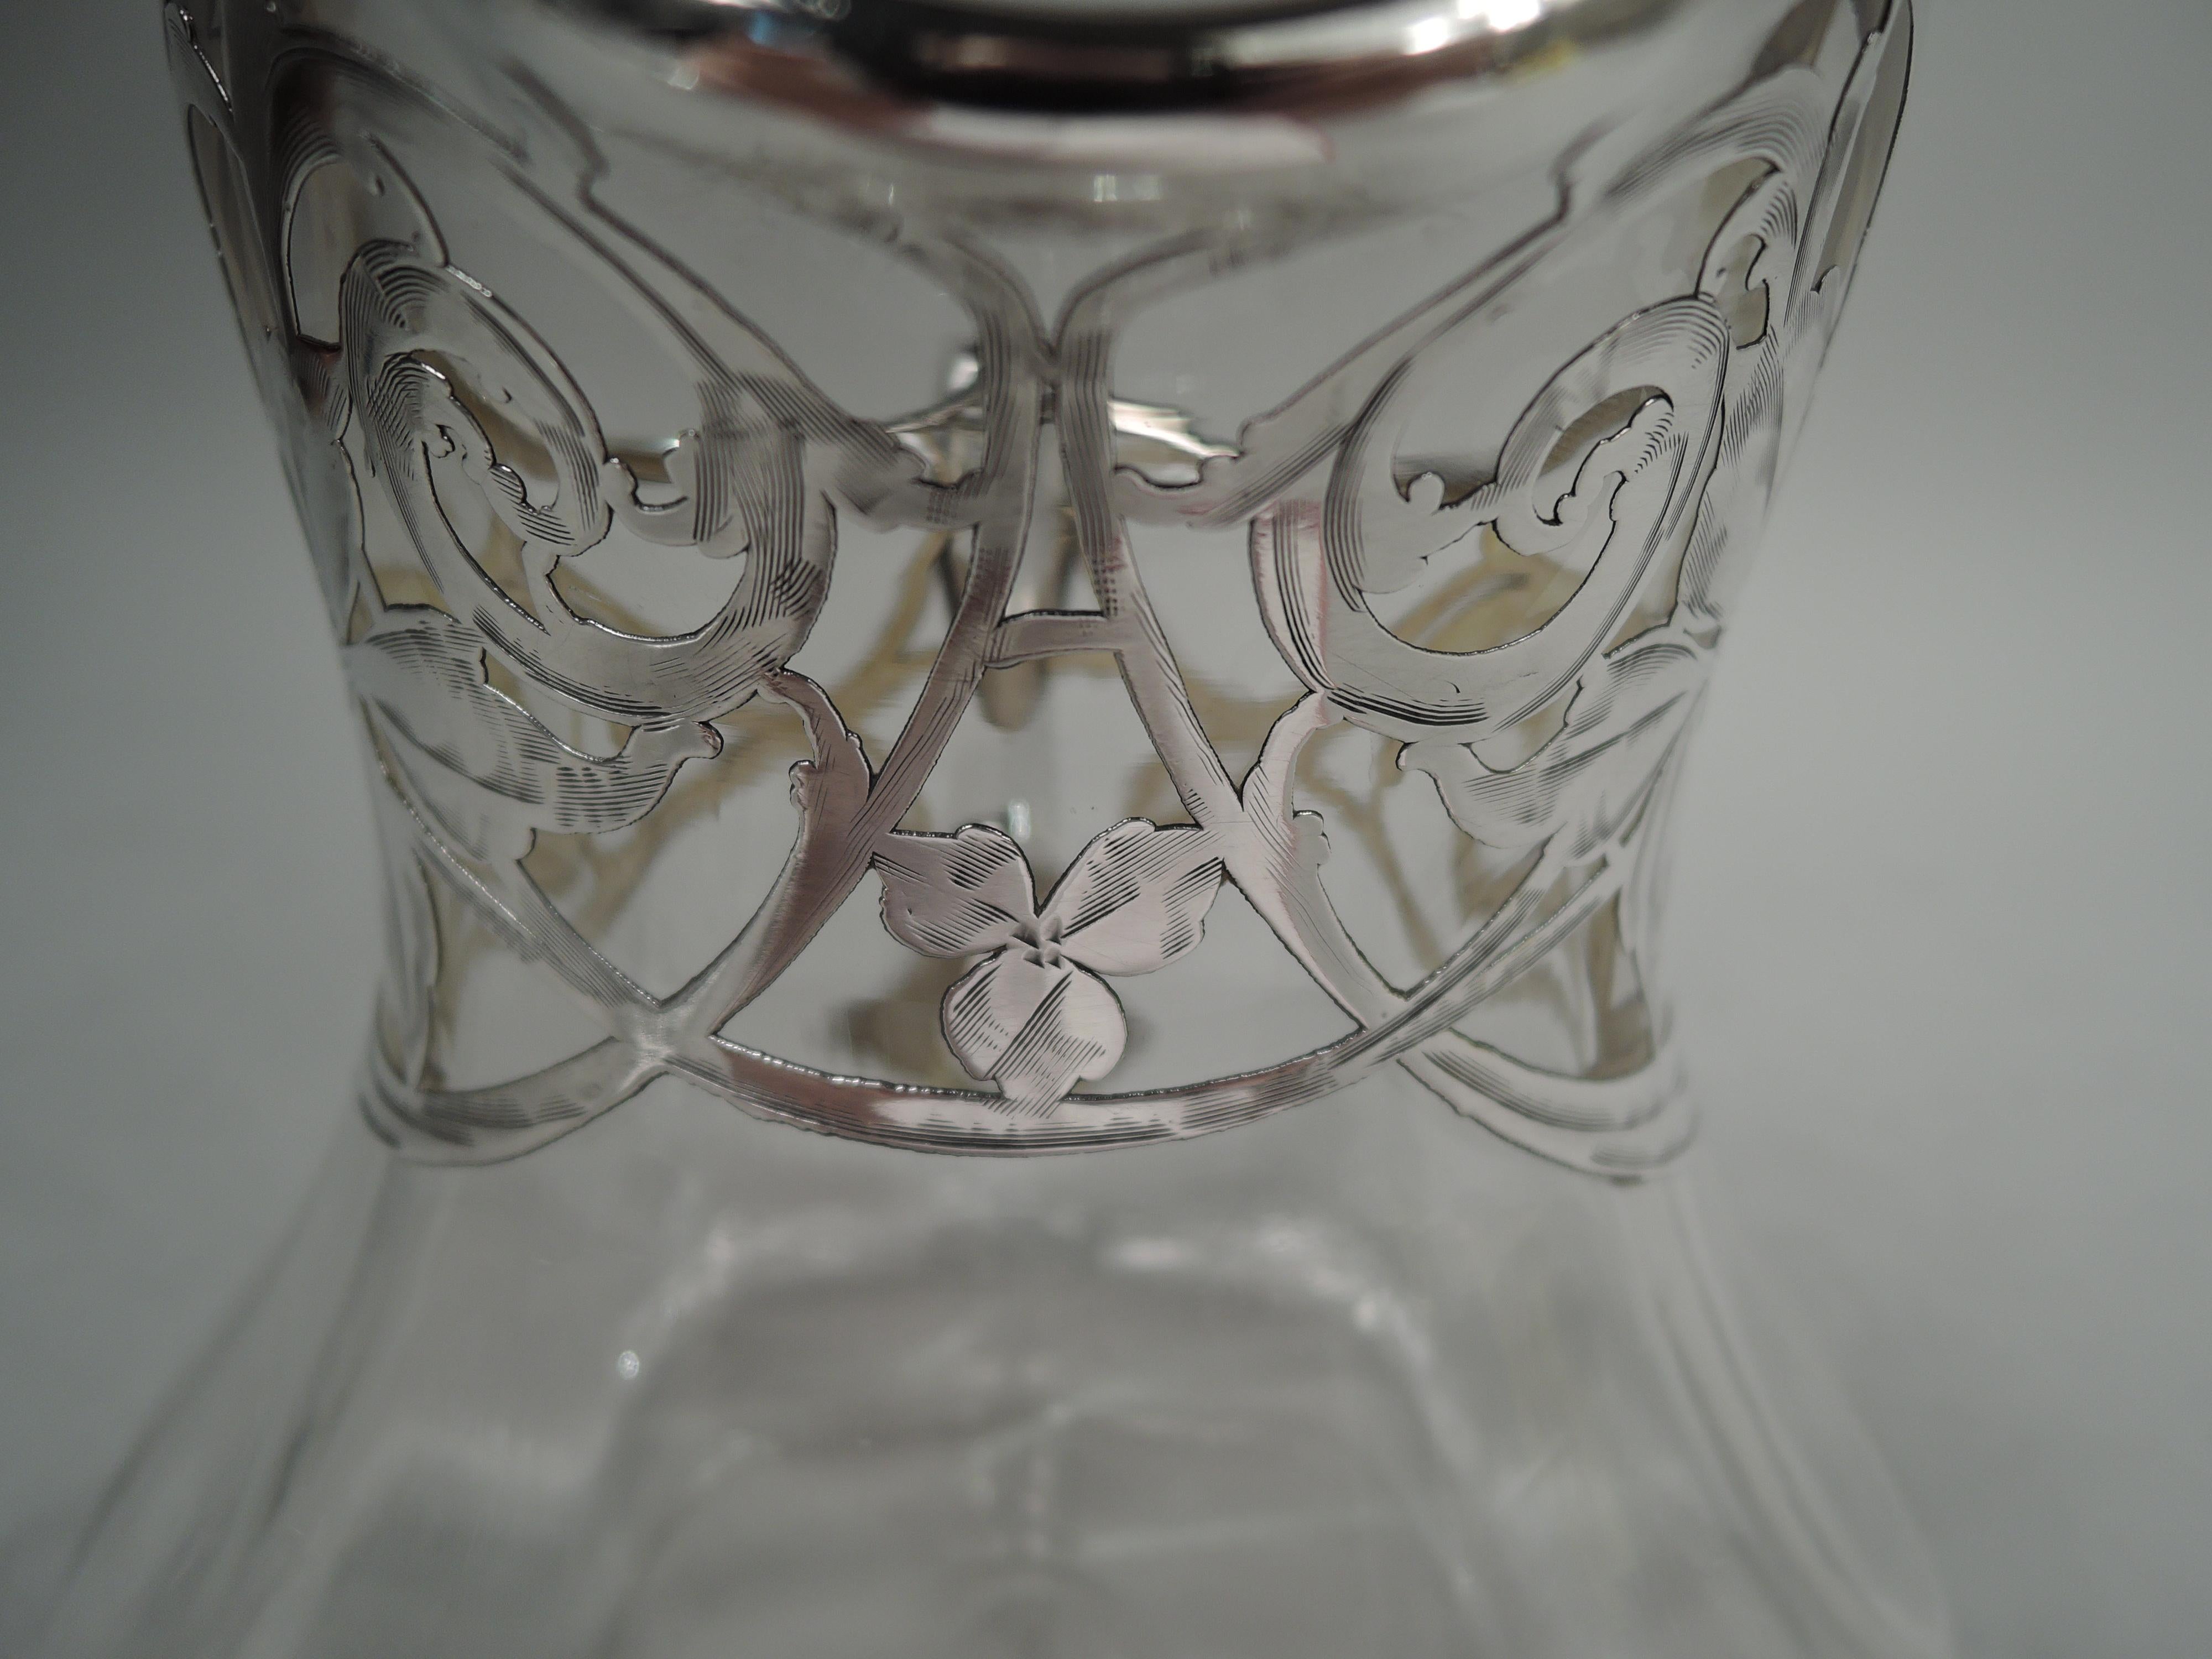 Antique American Art Nouveau Silver Overlay Water Pitcher 1